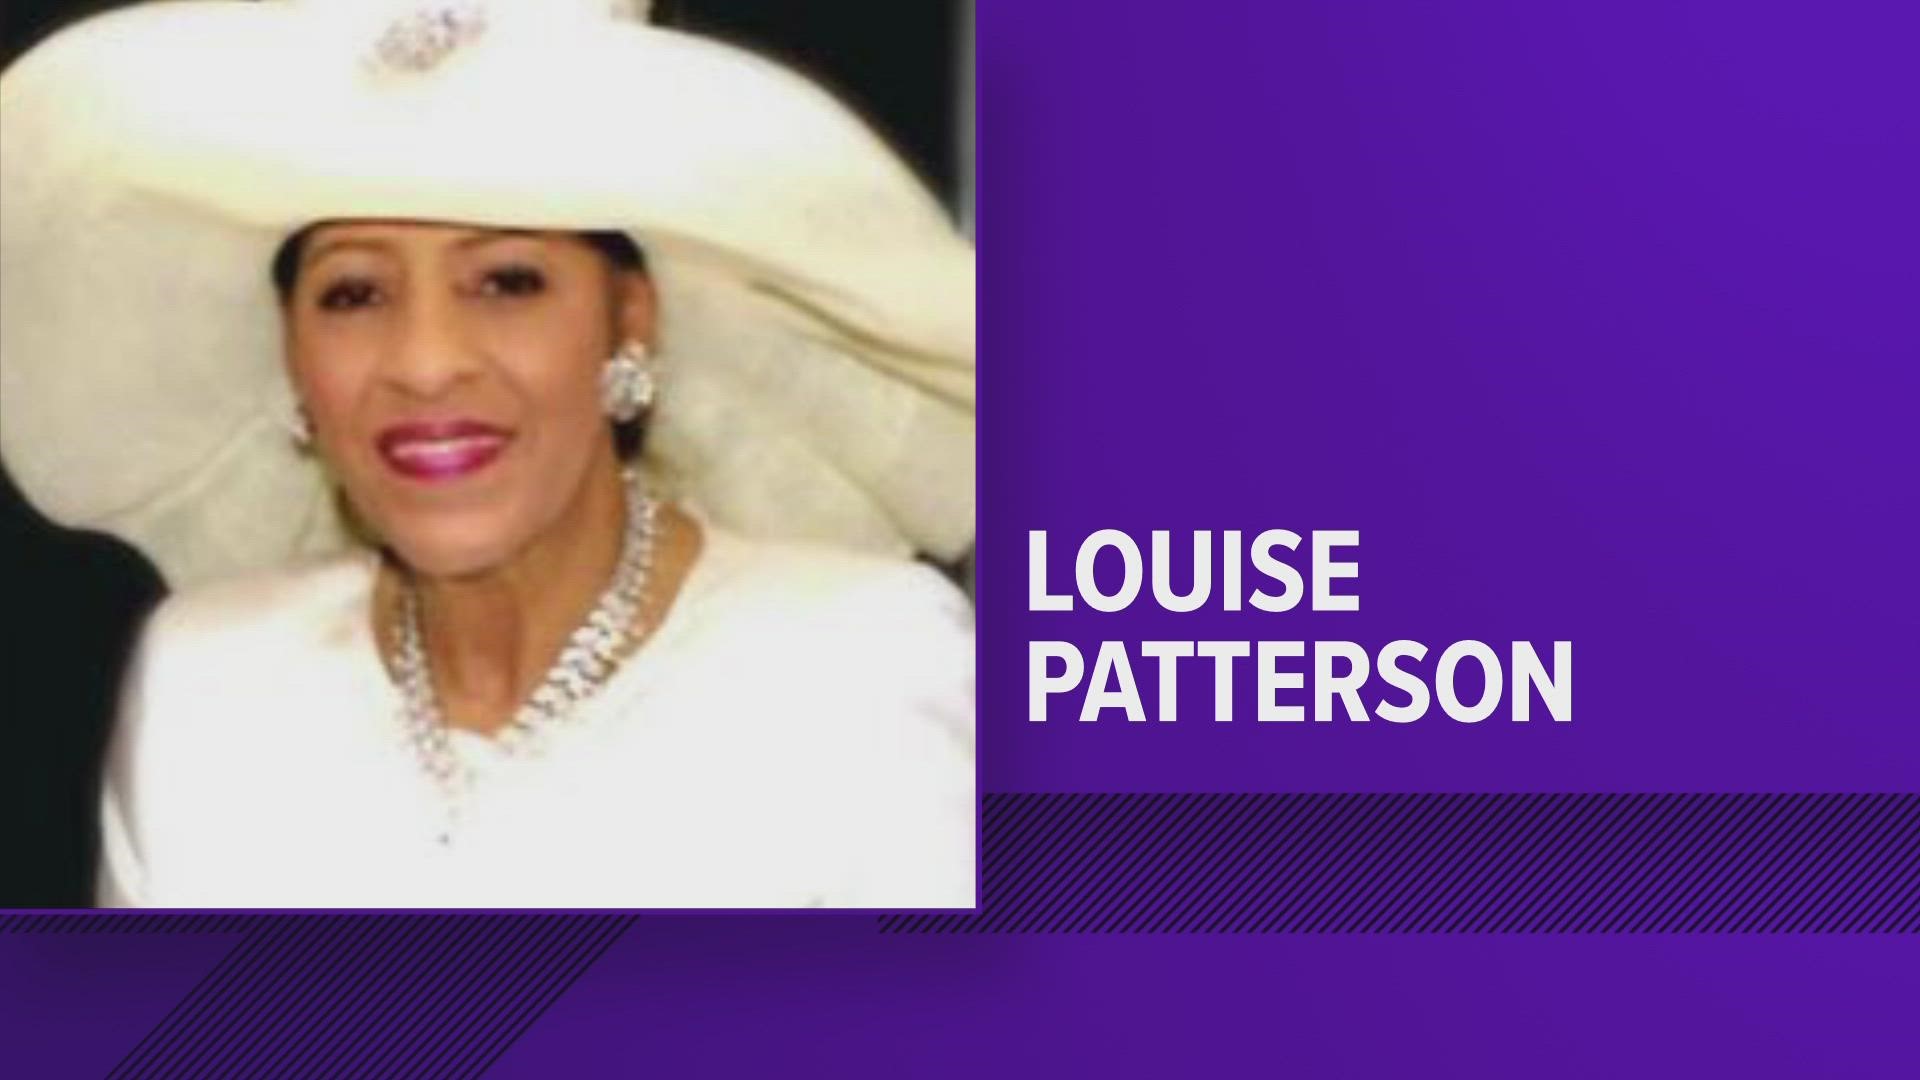 Louise Patterson, the wife of the late G.E. Patterson and Presiding Bishop of Church of God in Christ, passed away Sunday, November 20, 2022.